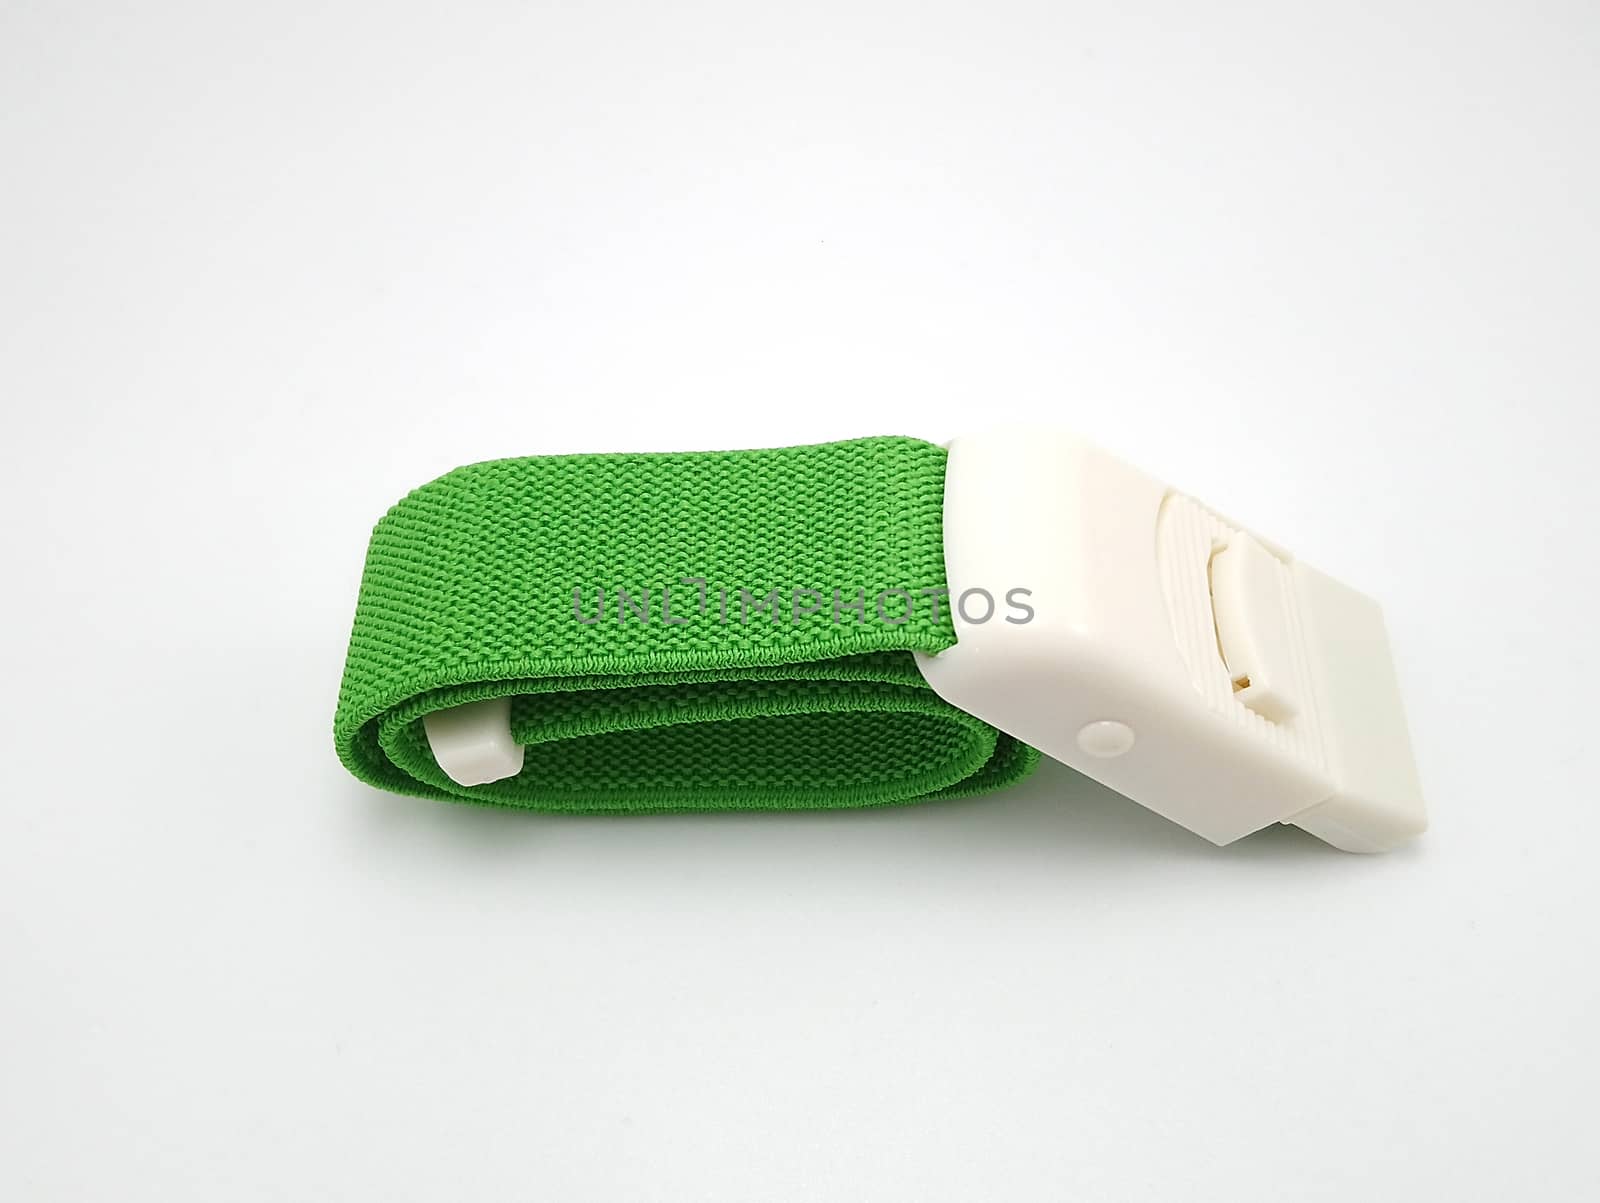 Green adjustable and stretchable fabric belt use to fasten things